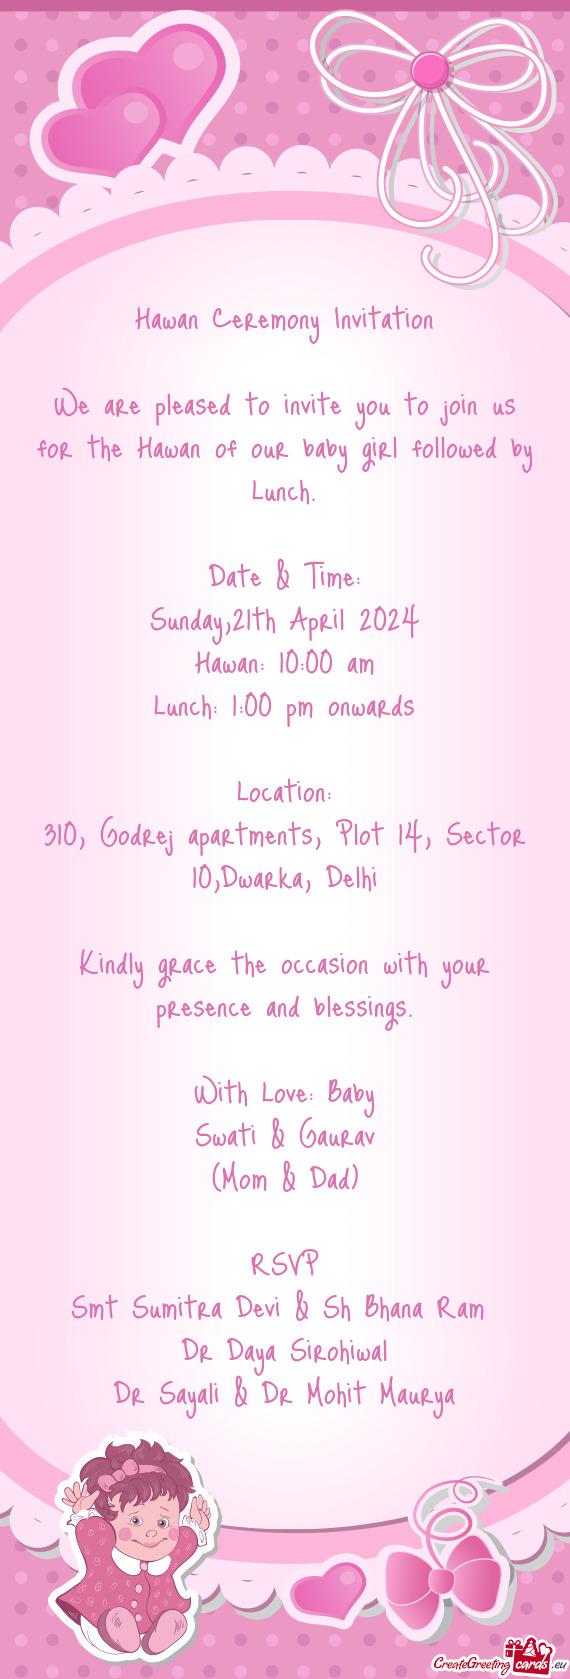 We are pleased to invite you to join us for the Hawan of our baby girl followed by Lunch